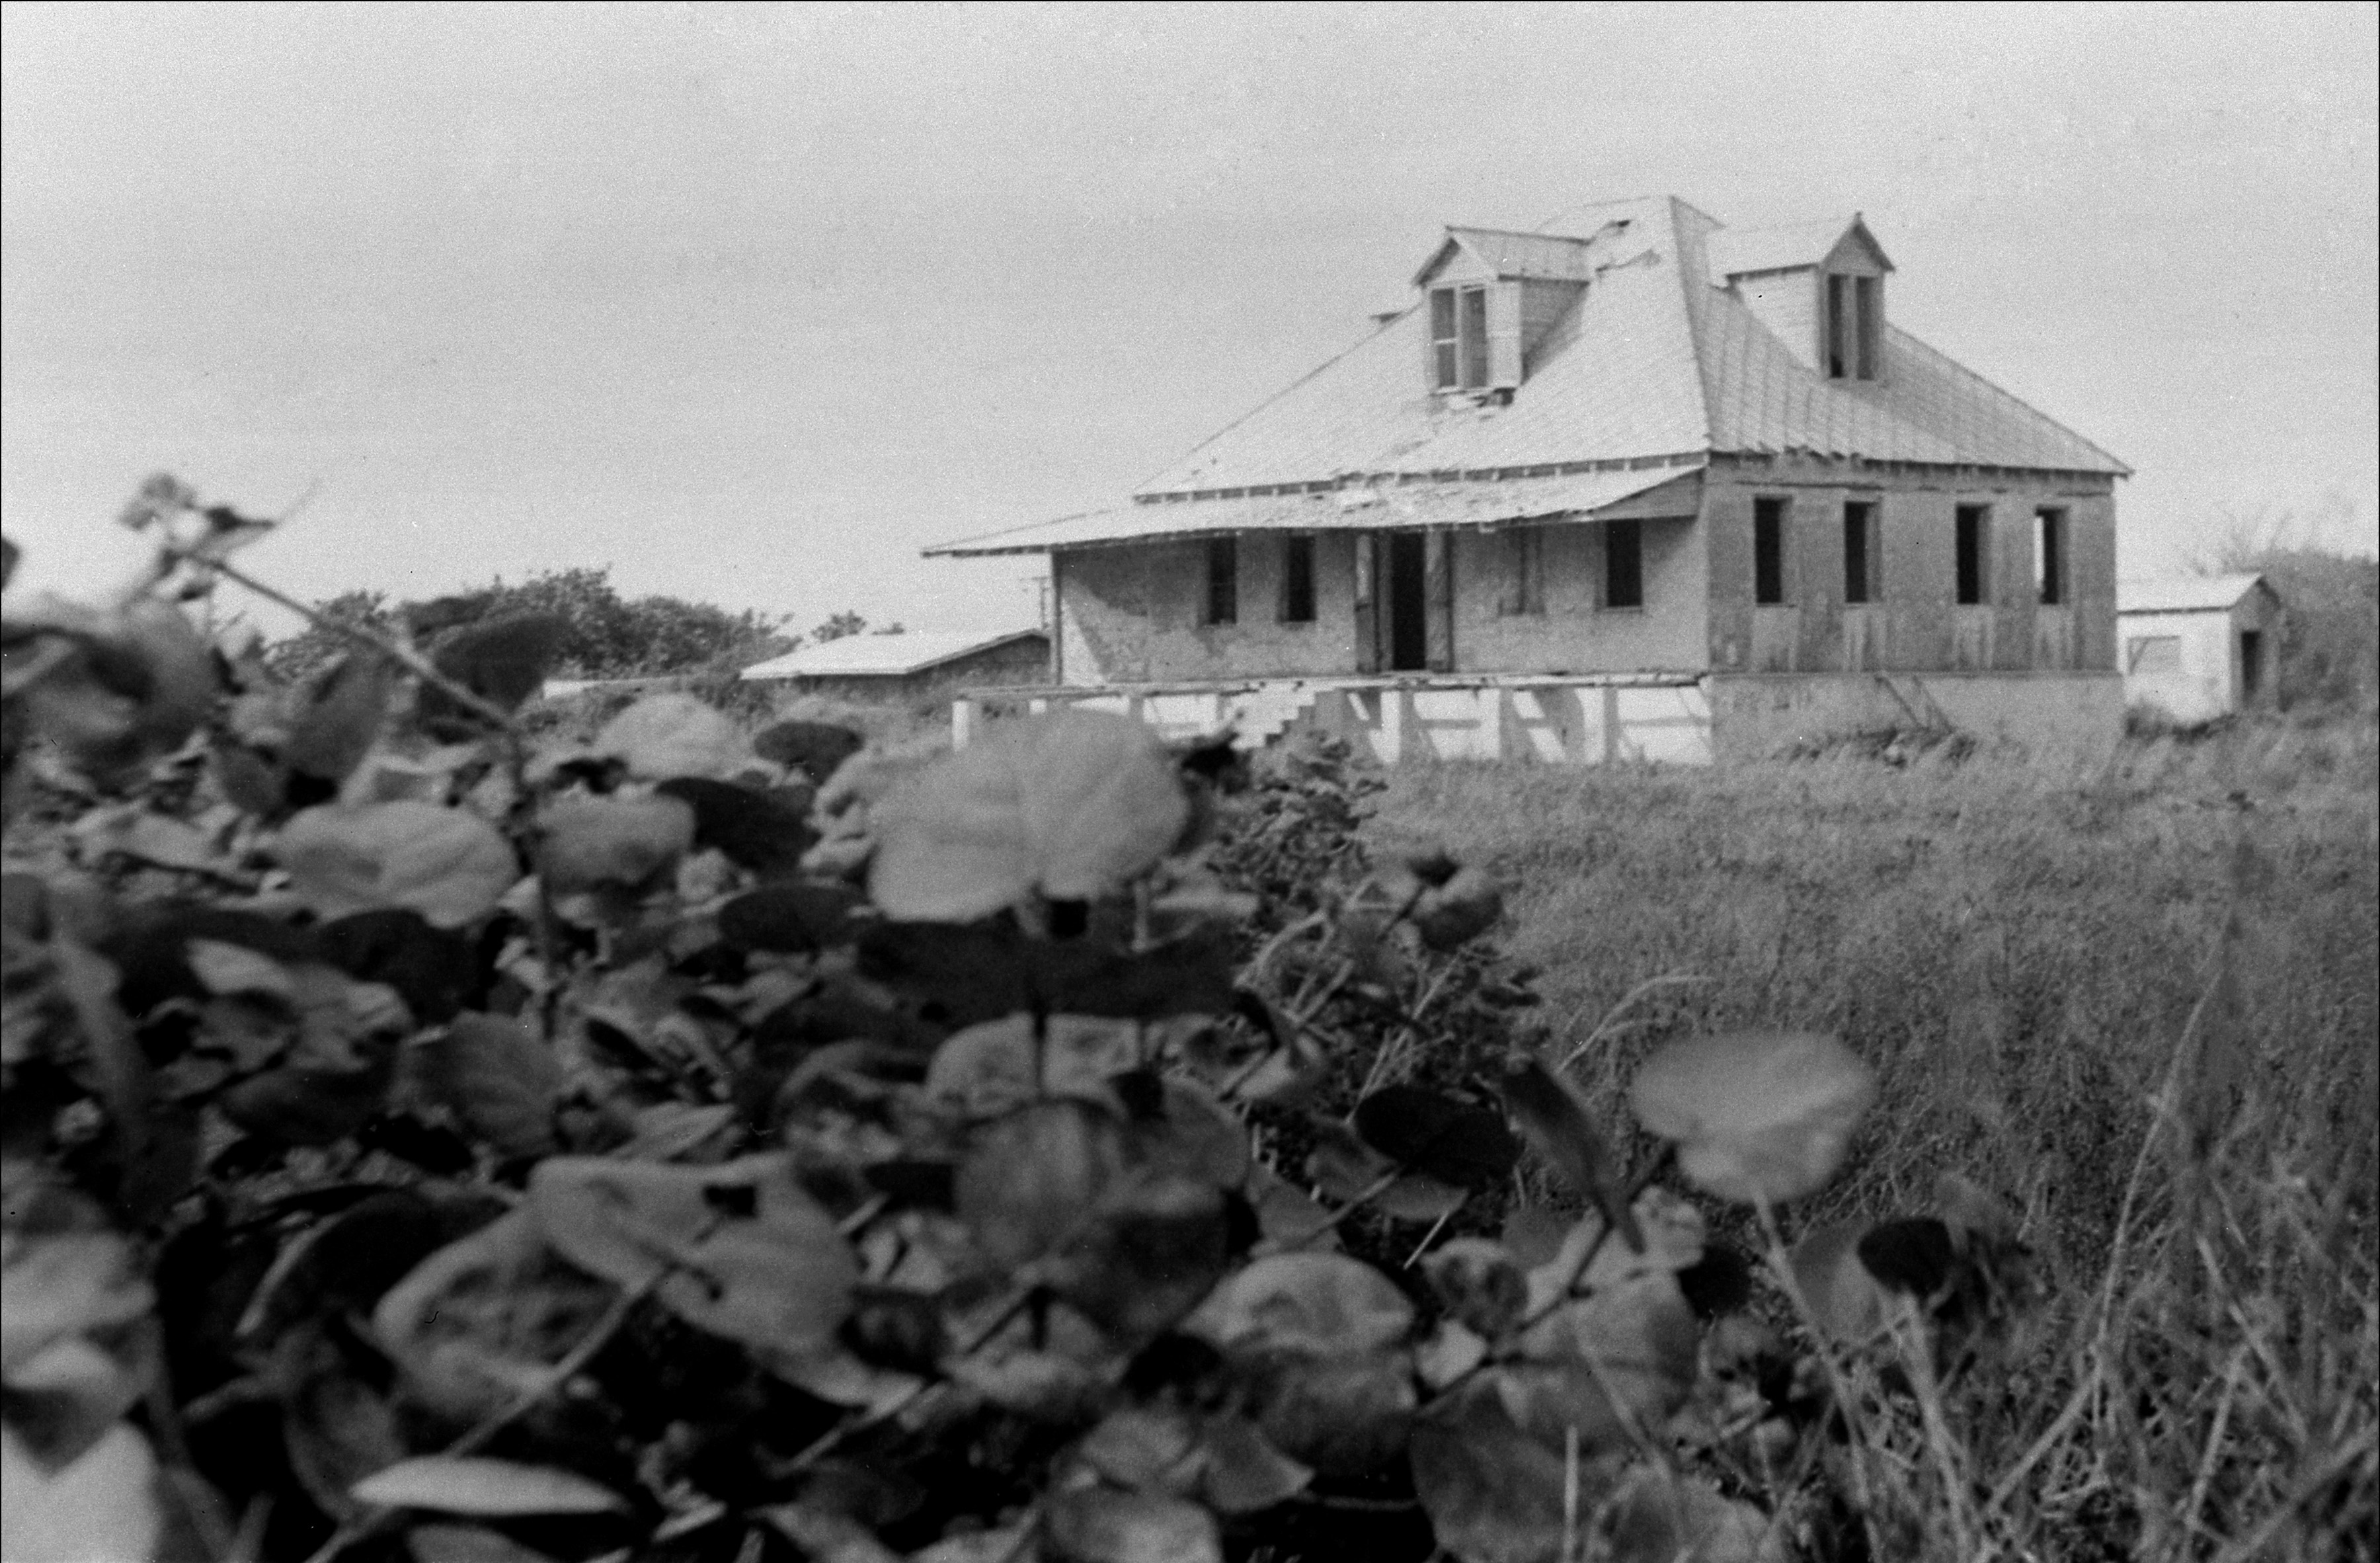 Commissioner's residence, Eight Mile Rock 1964